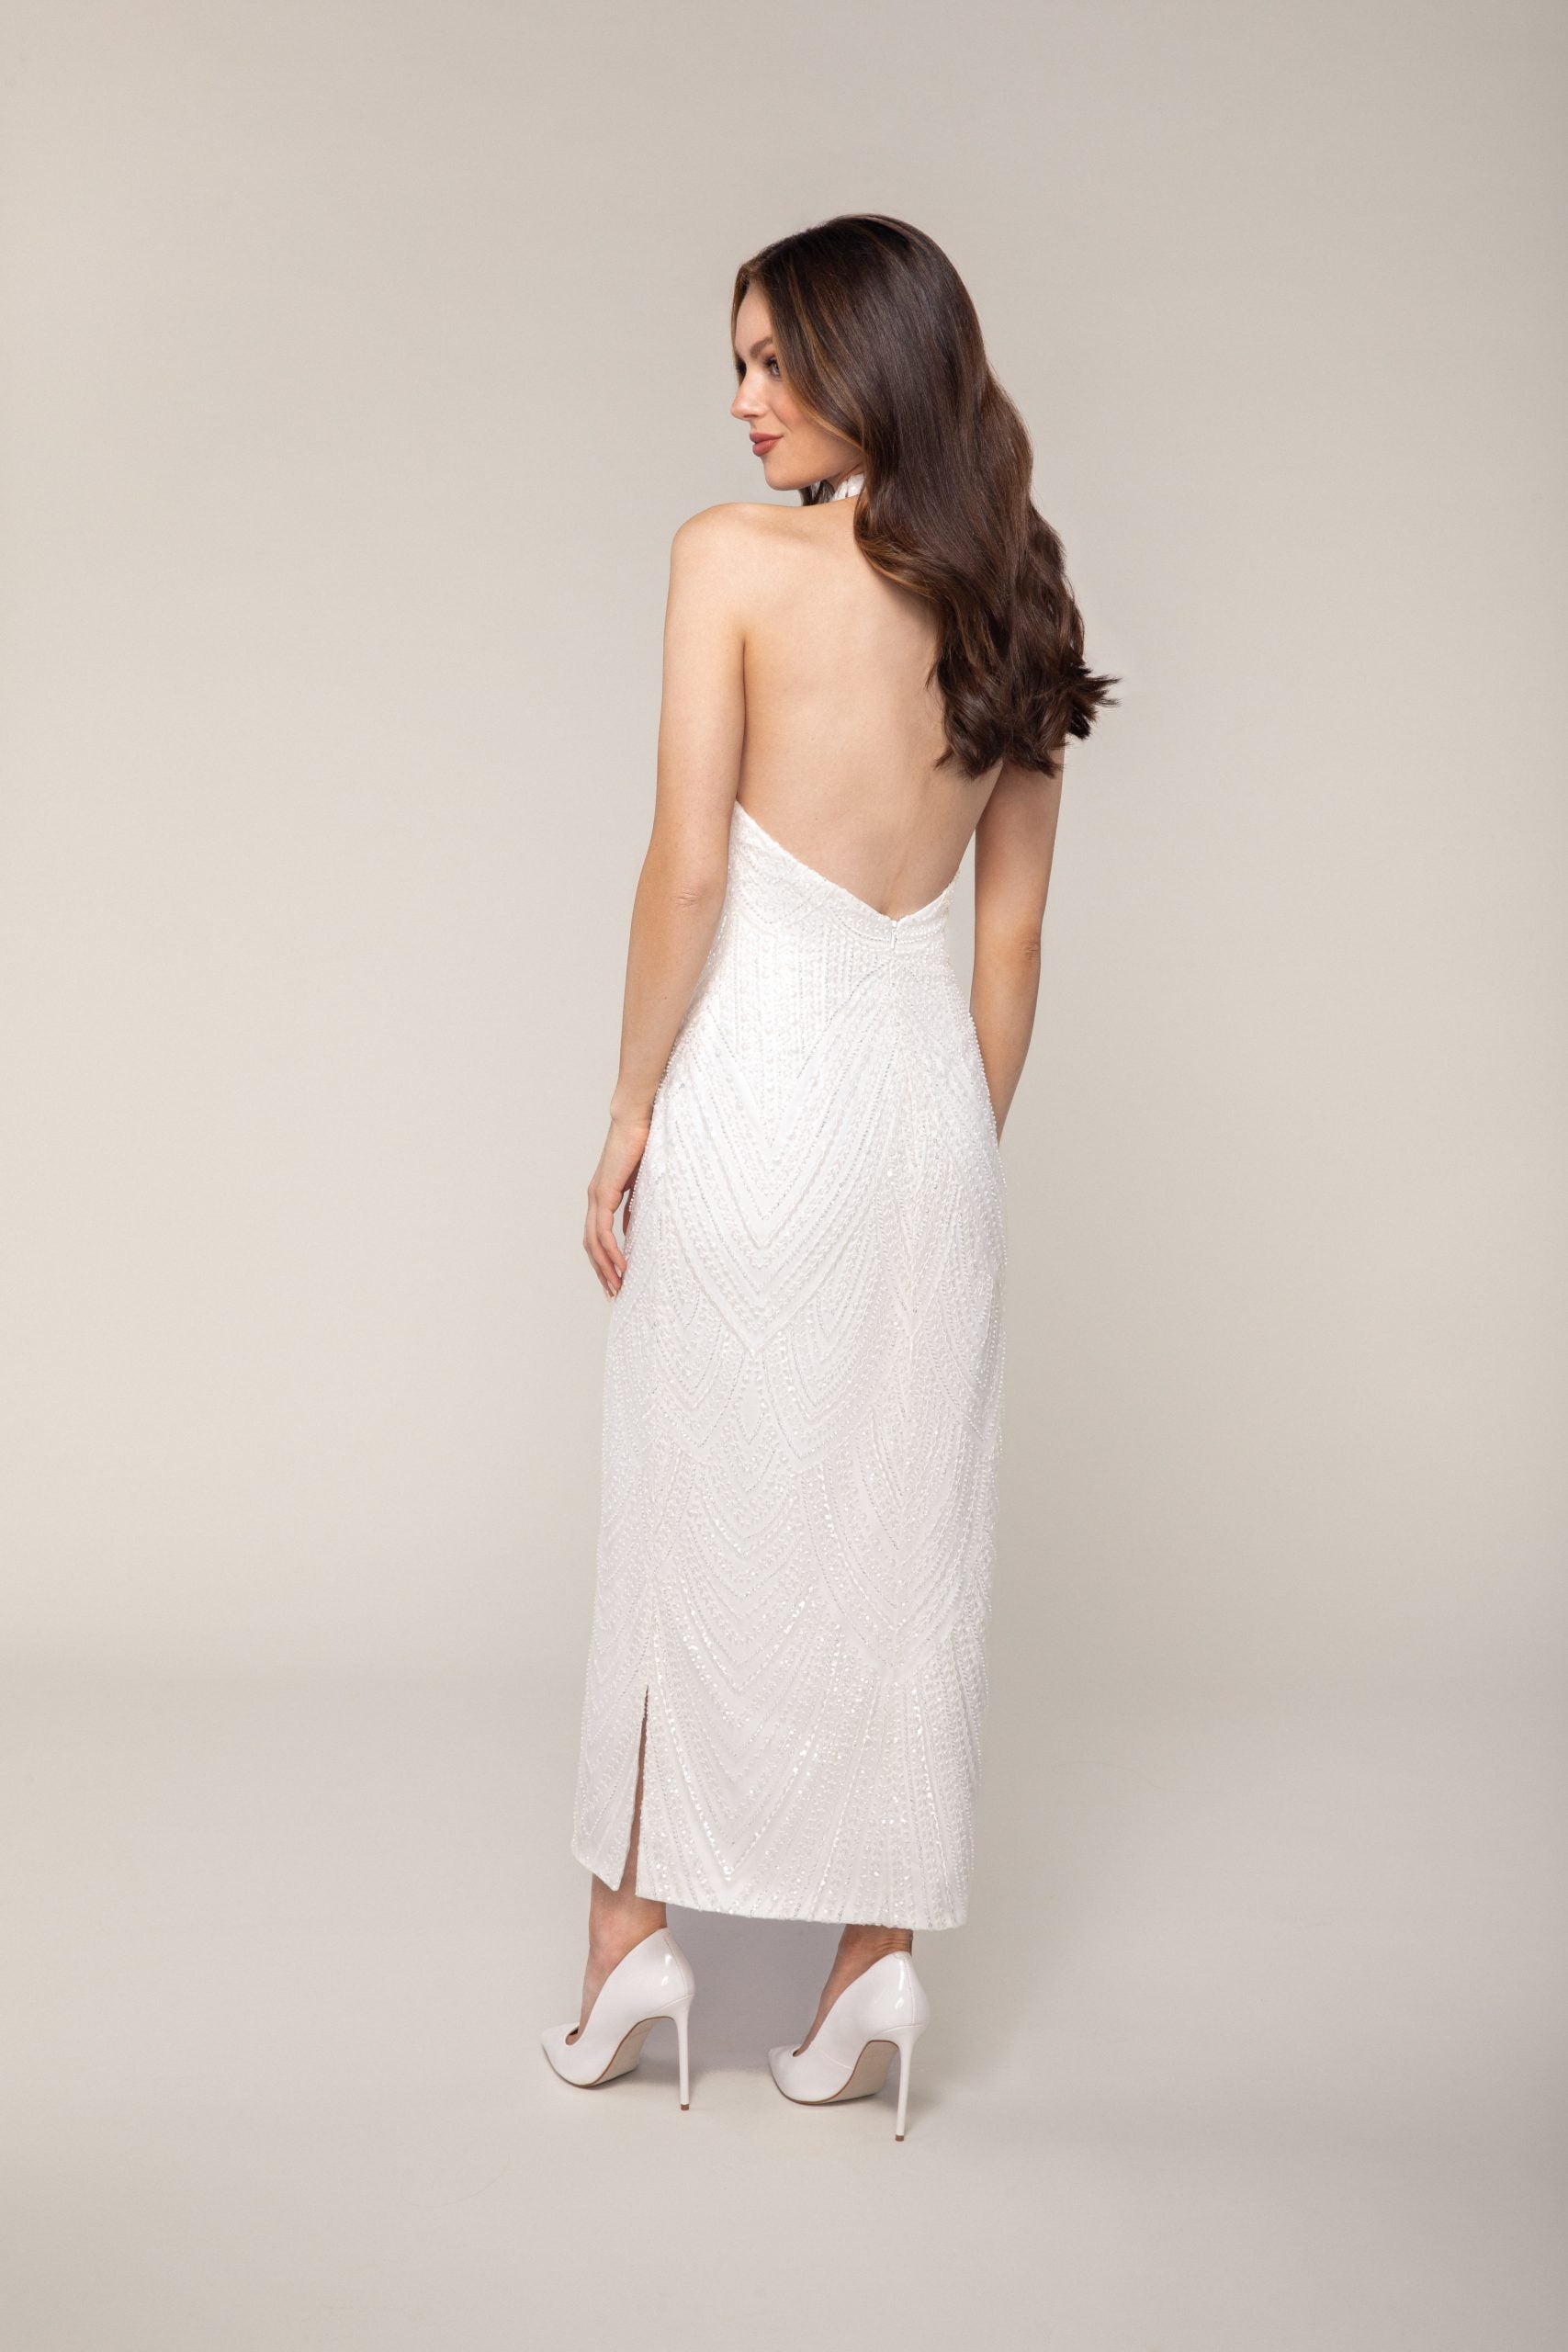 Halter Tea Length Dress Of Sequined Embroidery With Low Back by Anne Barge - Image 2